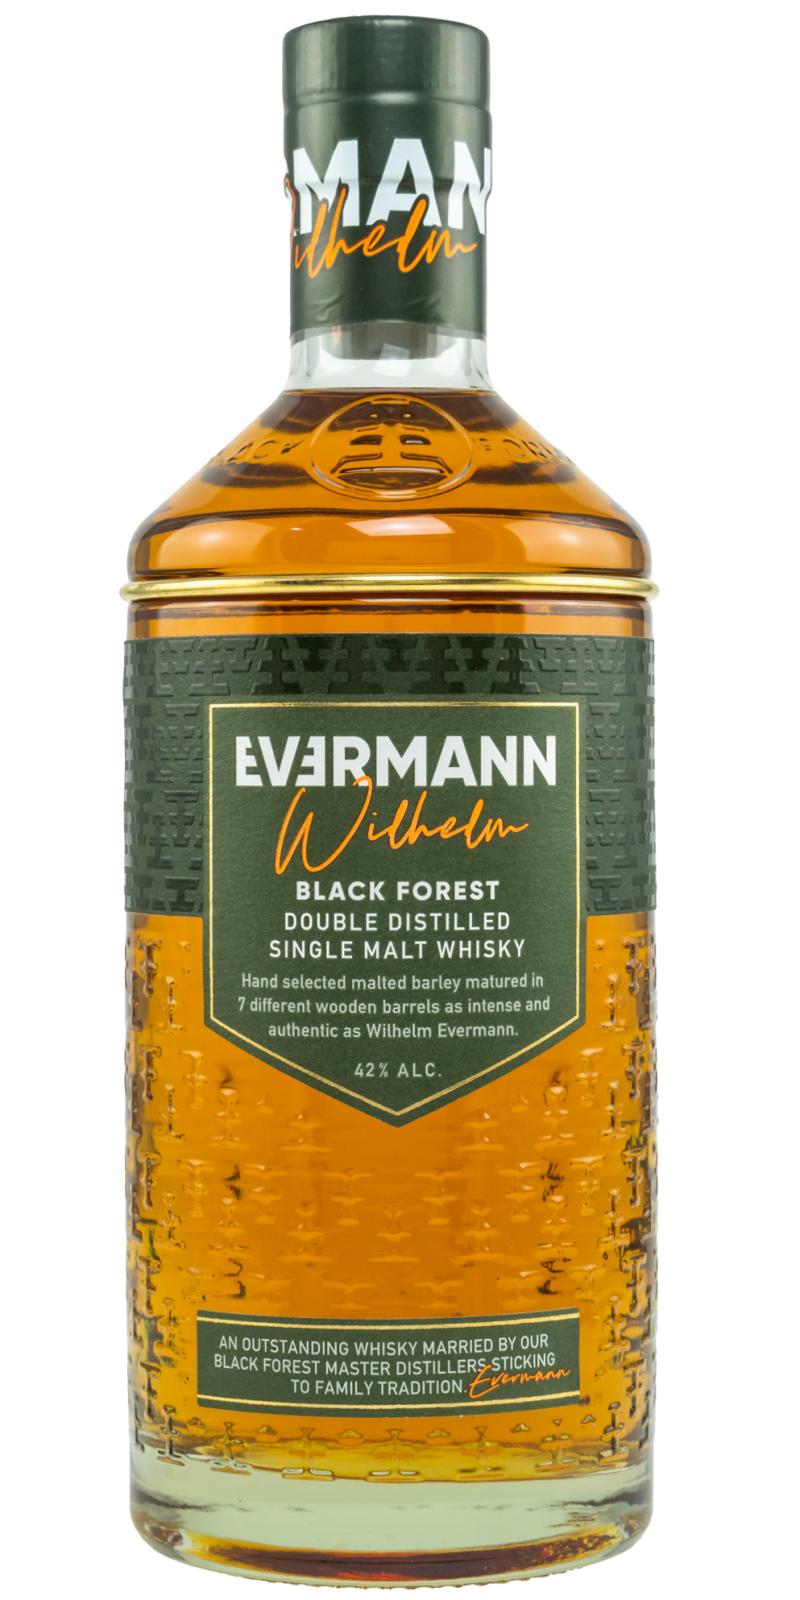 Evermann Wilhelm - Ratings and reviews - Whiskybase | Whisky